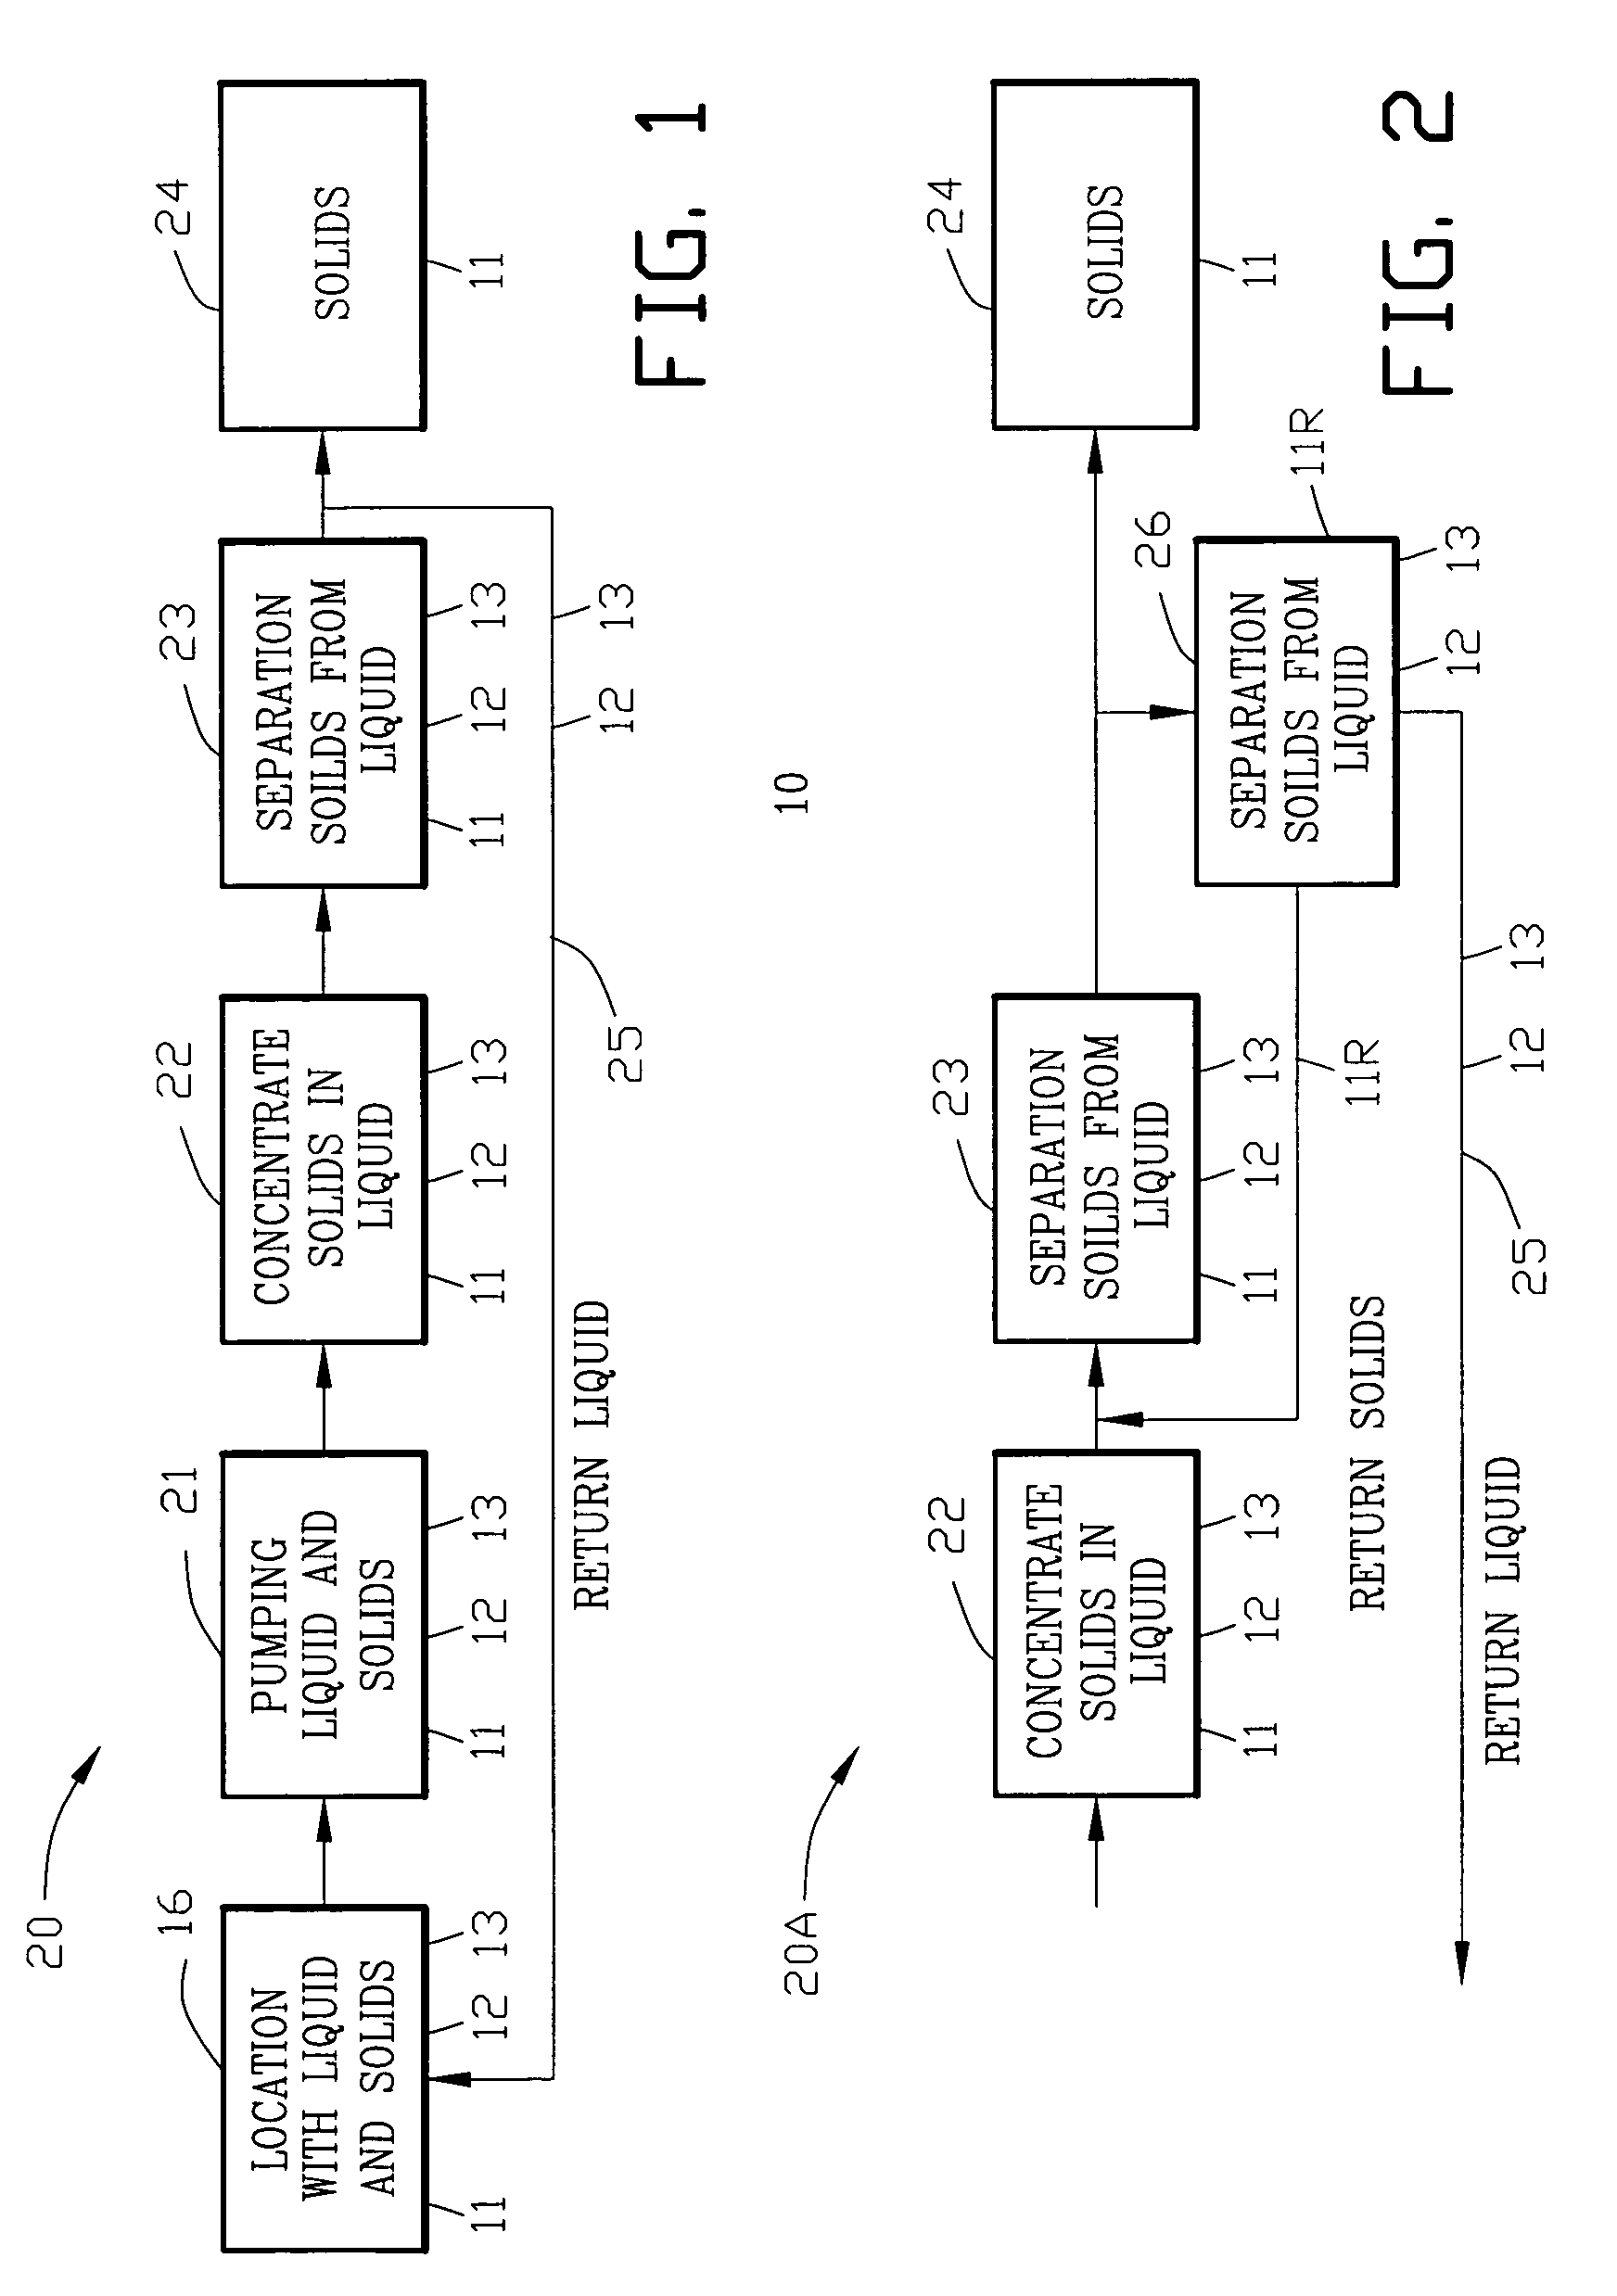 Apparatus for separating solids from a liquid